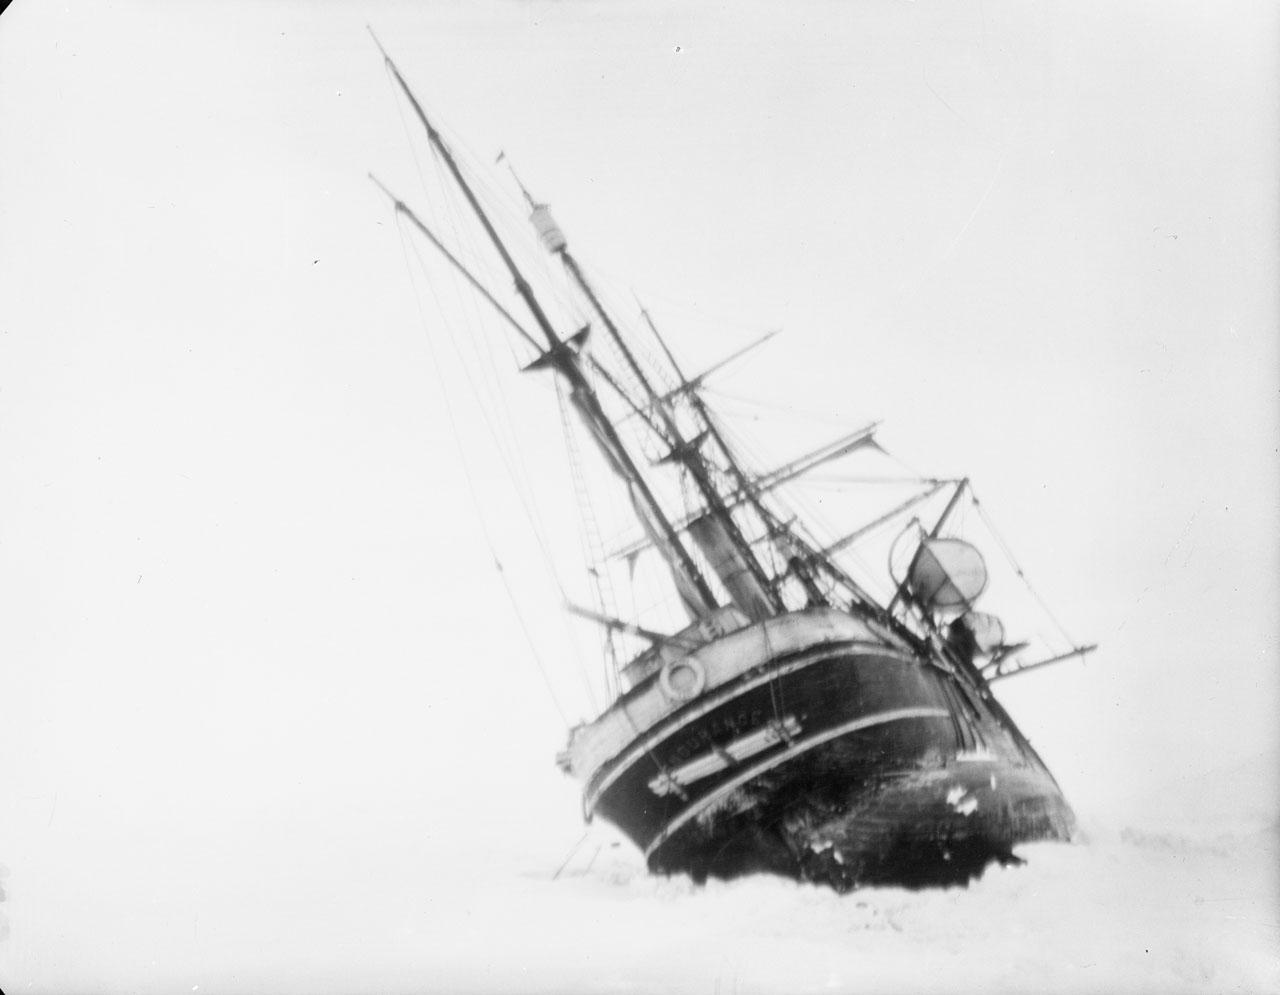 Historic black and white photograph showing Sir Ernest Shackleton's ship Endurance stuck in the ice, leaning to one side